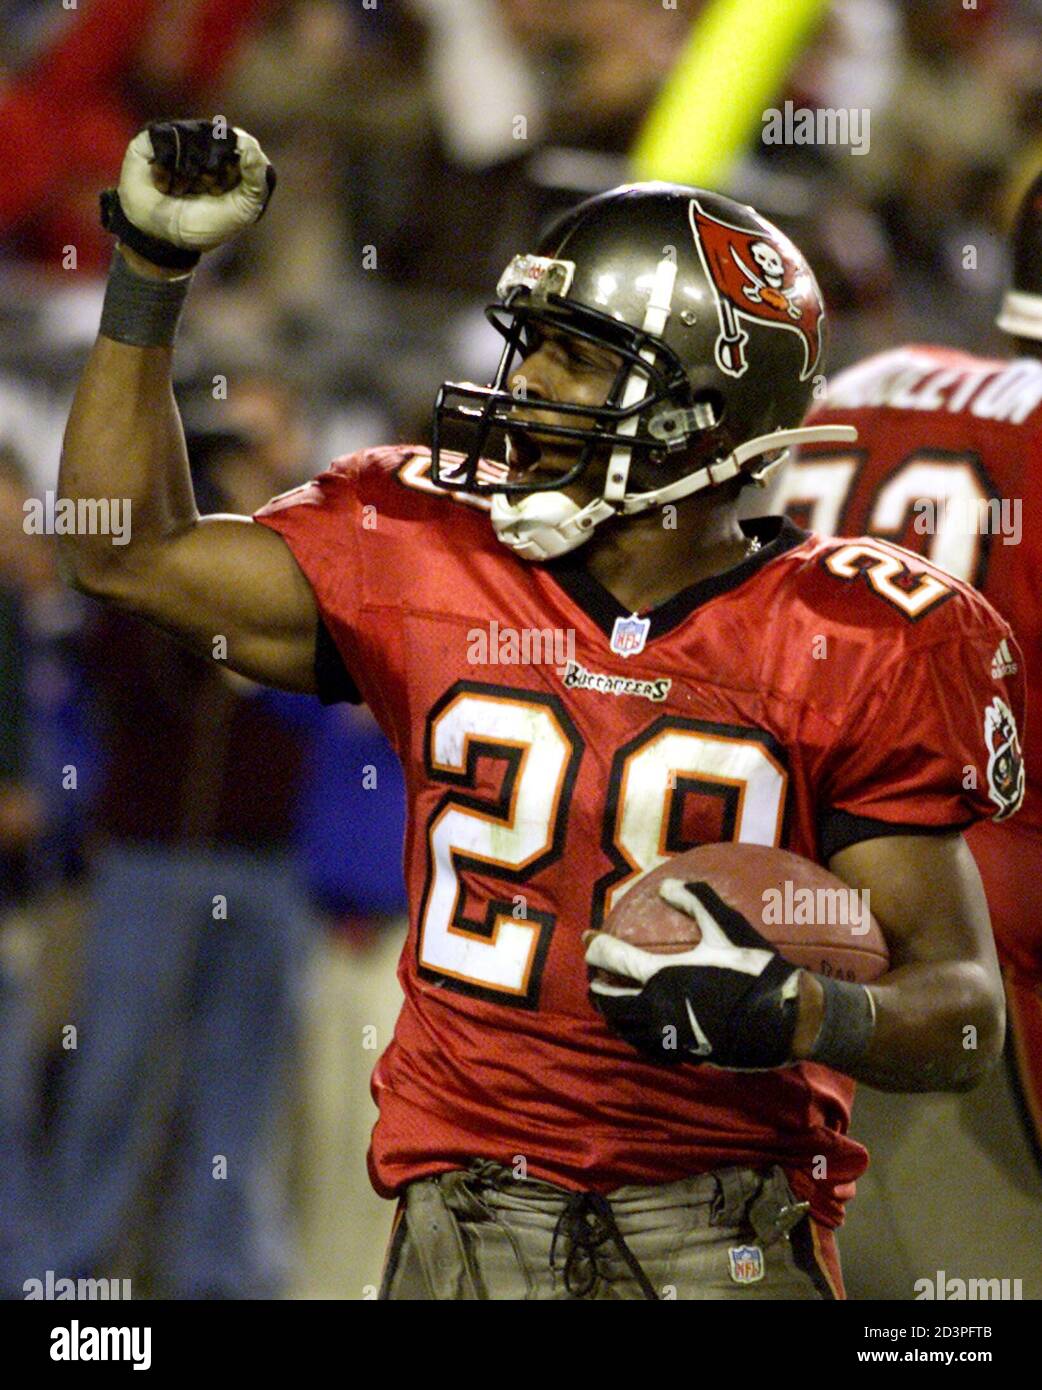 Tampa Bay Buccaneers' running back Warrick Dunn celebrates his game-winning  touchdown against the St. Louis